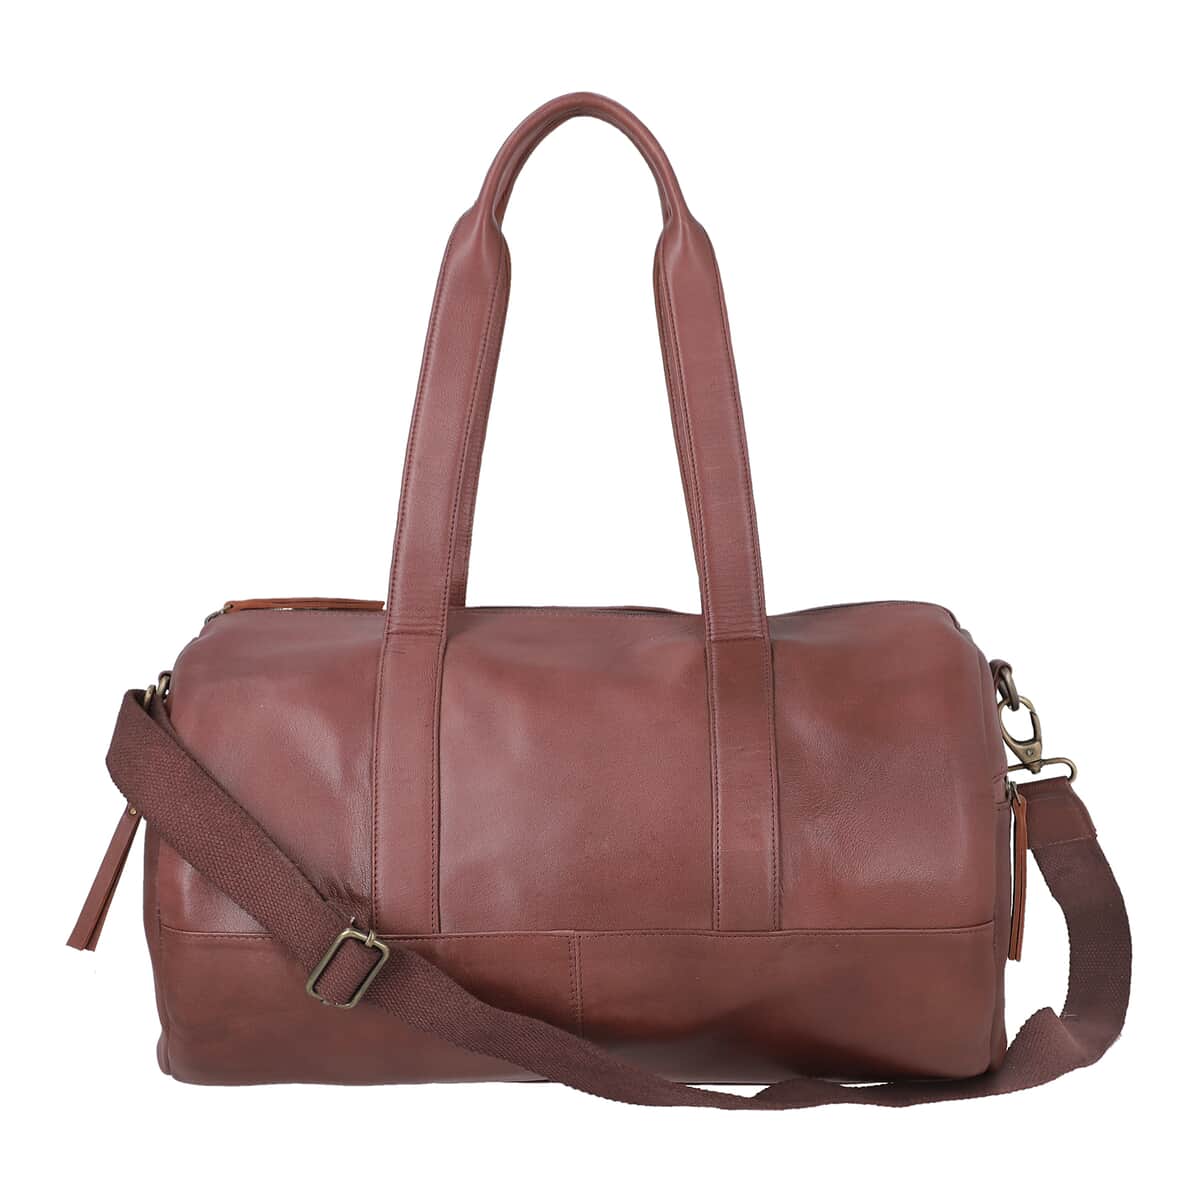 "100% Genuine Vintage Leather Duffle Bag, Color: Dark Brown, Size : 15L x 9.75HX10W inch" image number 0